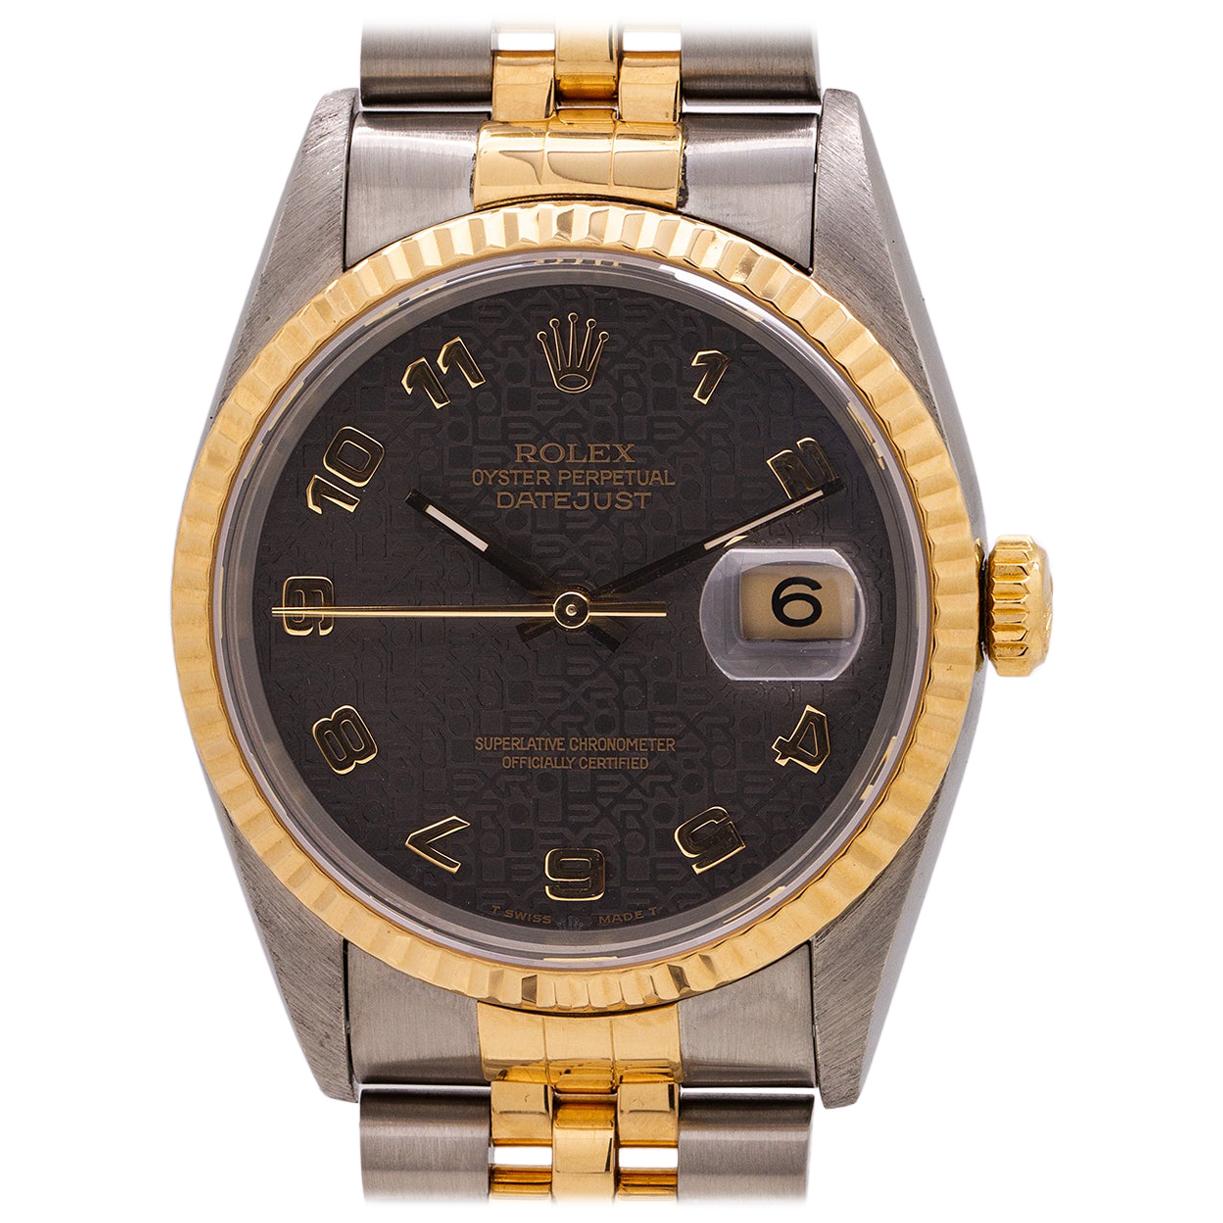 Rolex DateJust Ref# 16233 Stainless Steel and 18 Karat Jubilee Dial, circa 1993 For Sale